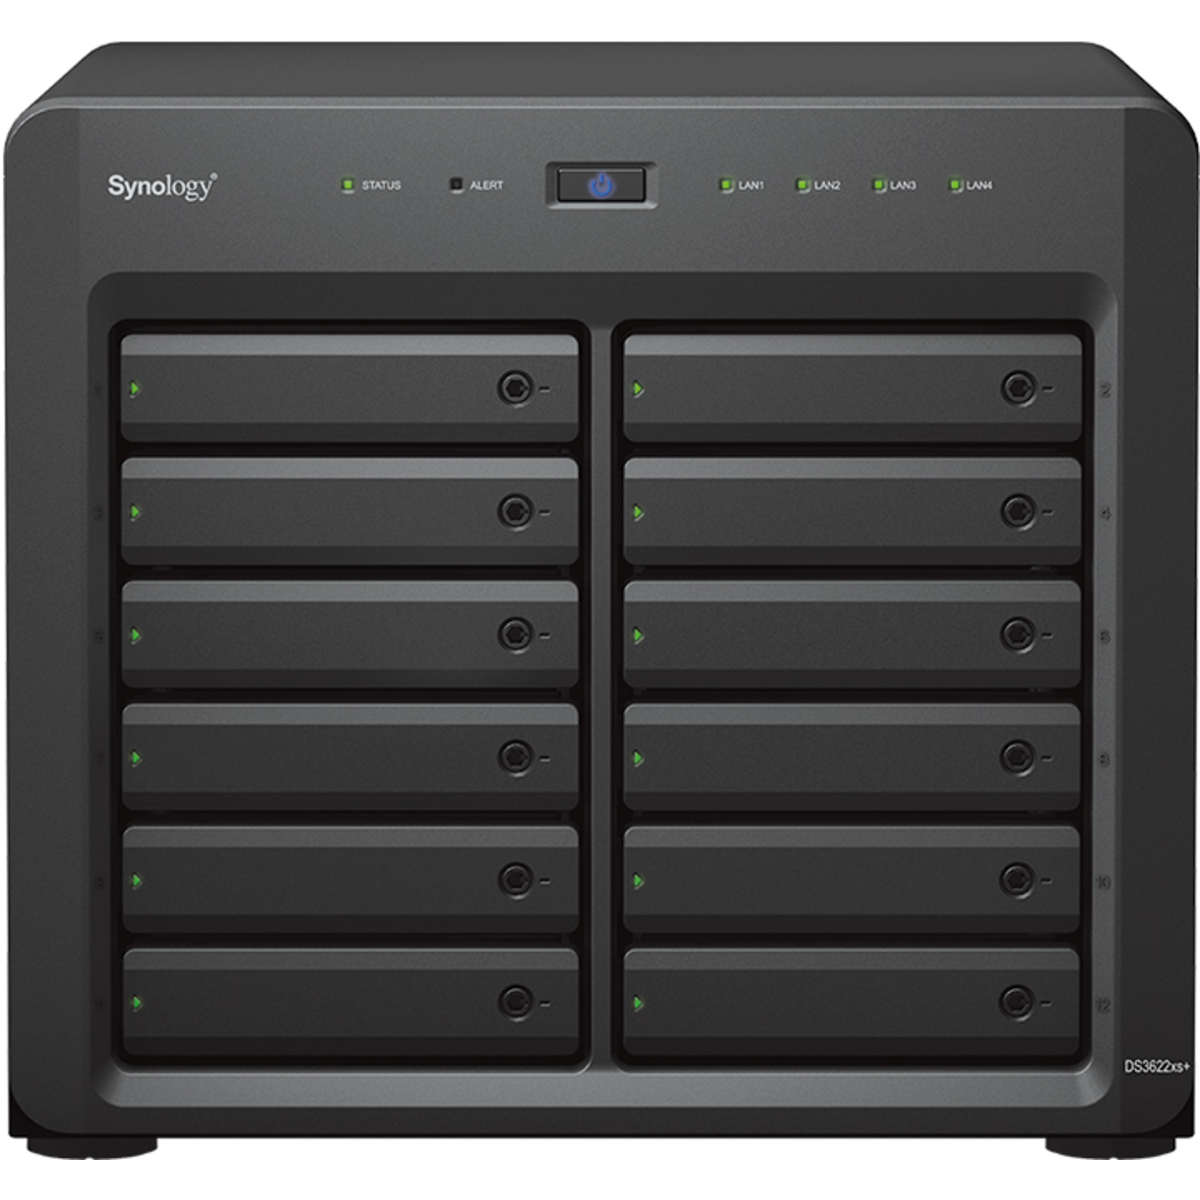 Synology DiskStation DS3622xs+ 28tb 12-Bay Desktop Multimedia / Power User / Business NAS - Network Attached Storage Device 7x4tb Seagate IronWolf Pro ST4000NE001 3.5 7200rpm SATA 6Gb/s HDD NAS Class Drives Installed - Burn-In Tested DiskStation DS3622xs+